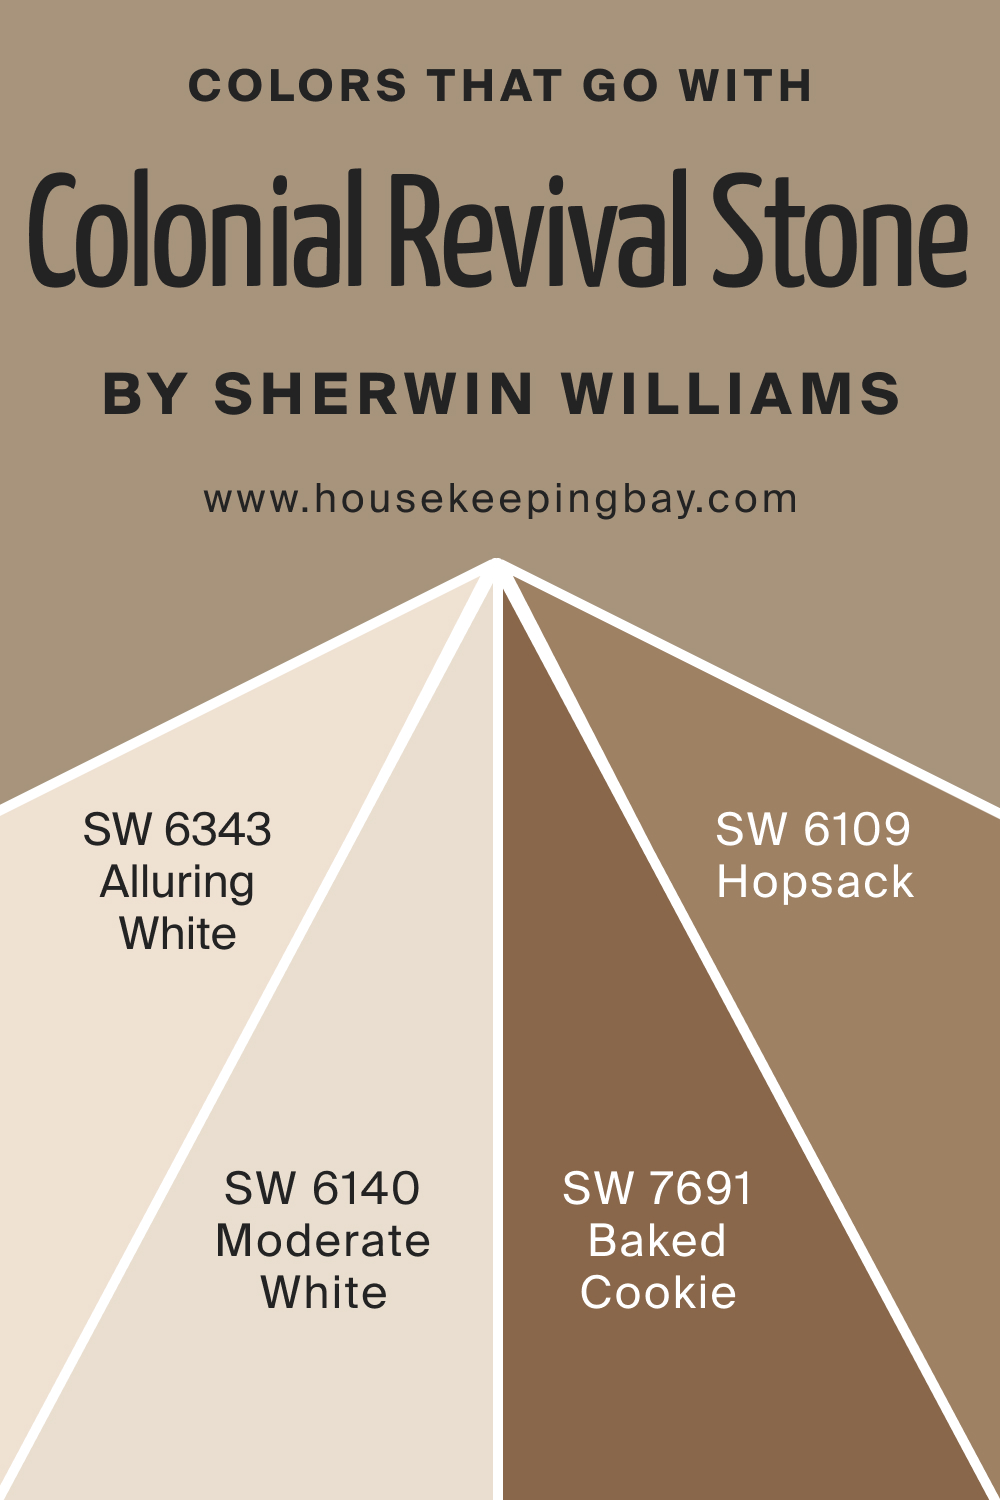 Colors that goes with SW 2827 Colonial Revival Stone by Sherwin Williams